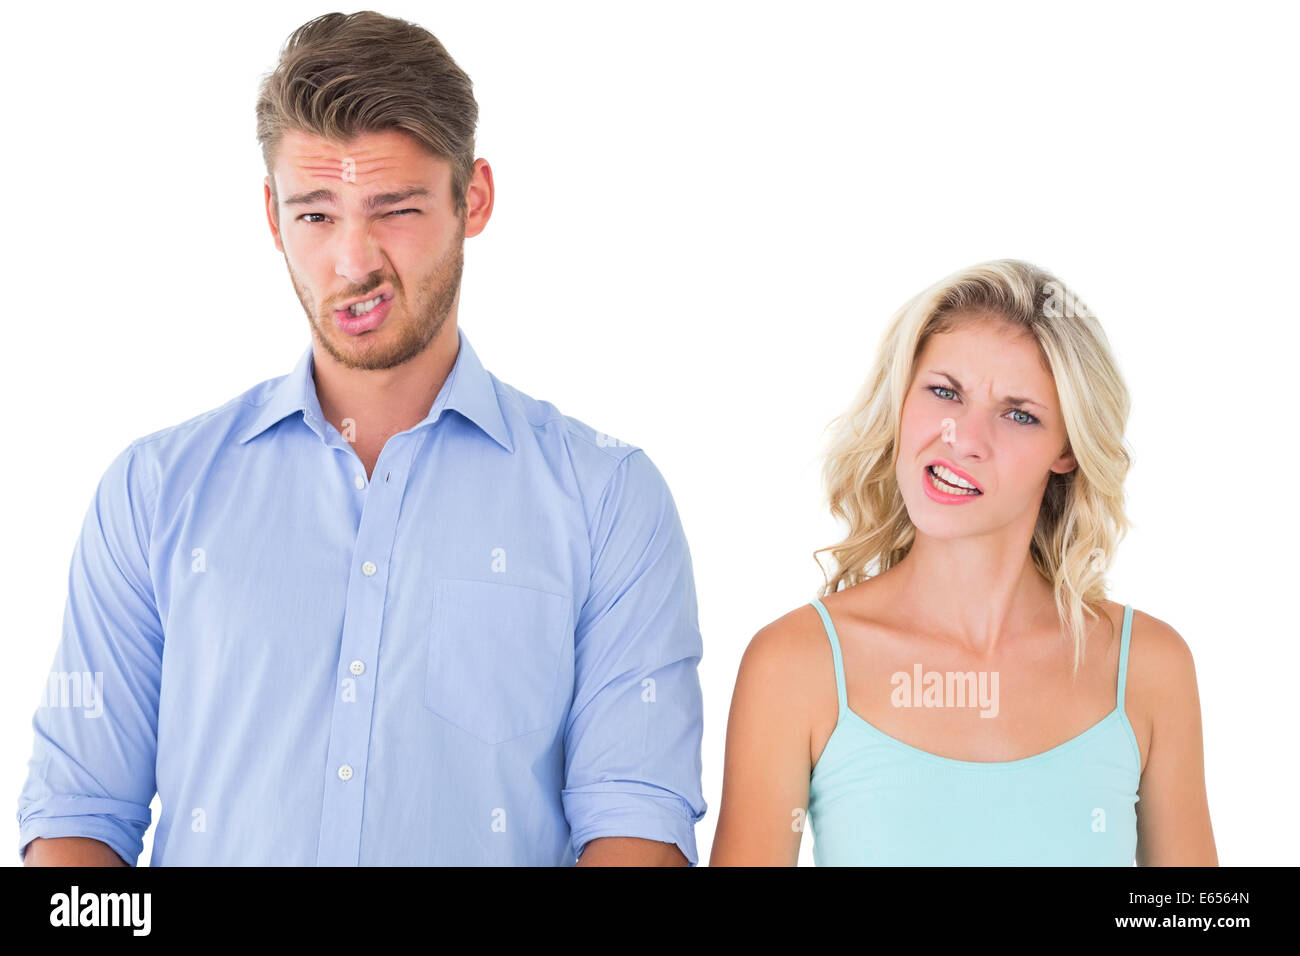 Young couple making silly faces Stock Photo